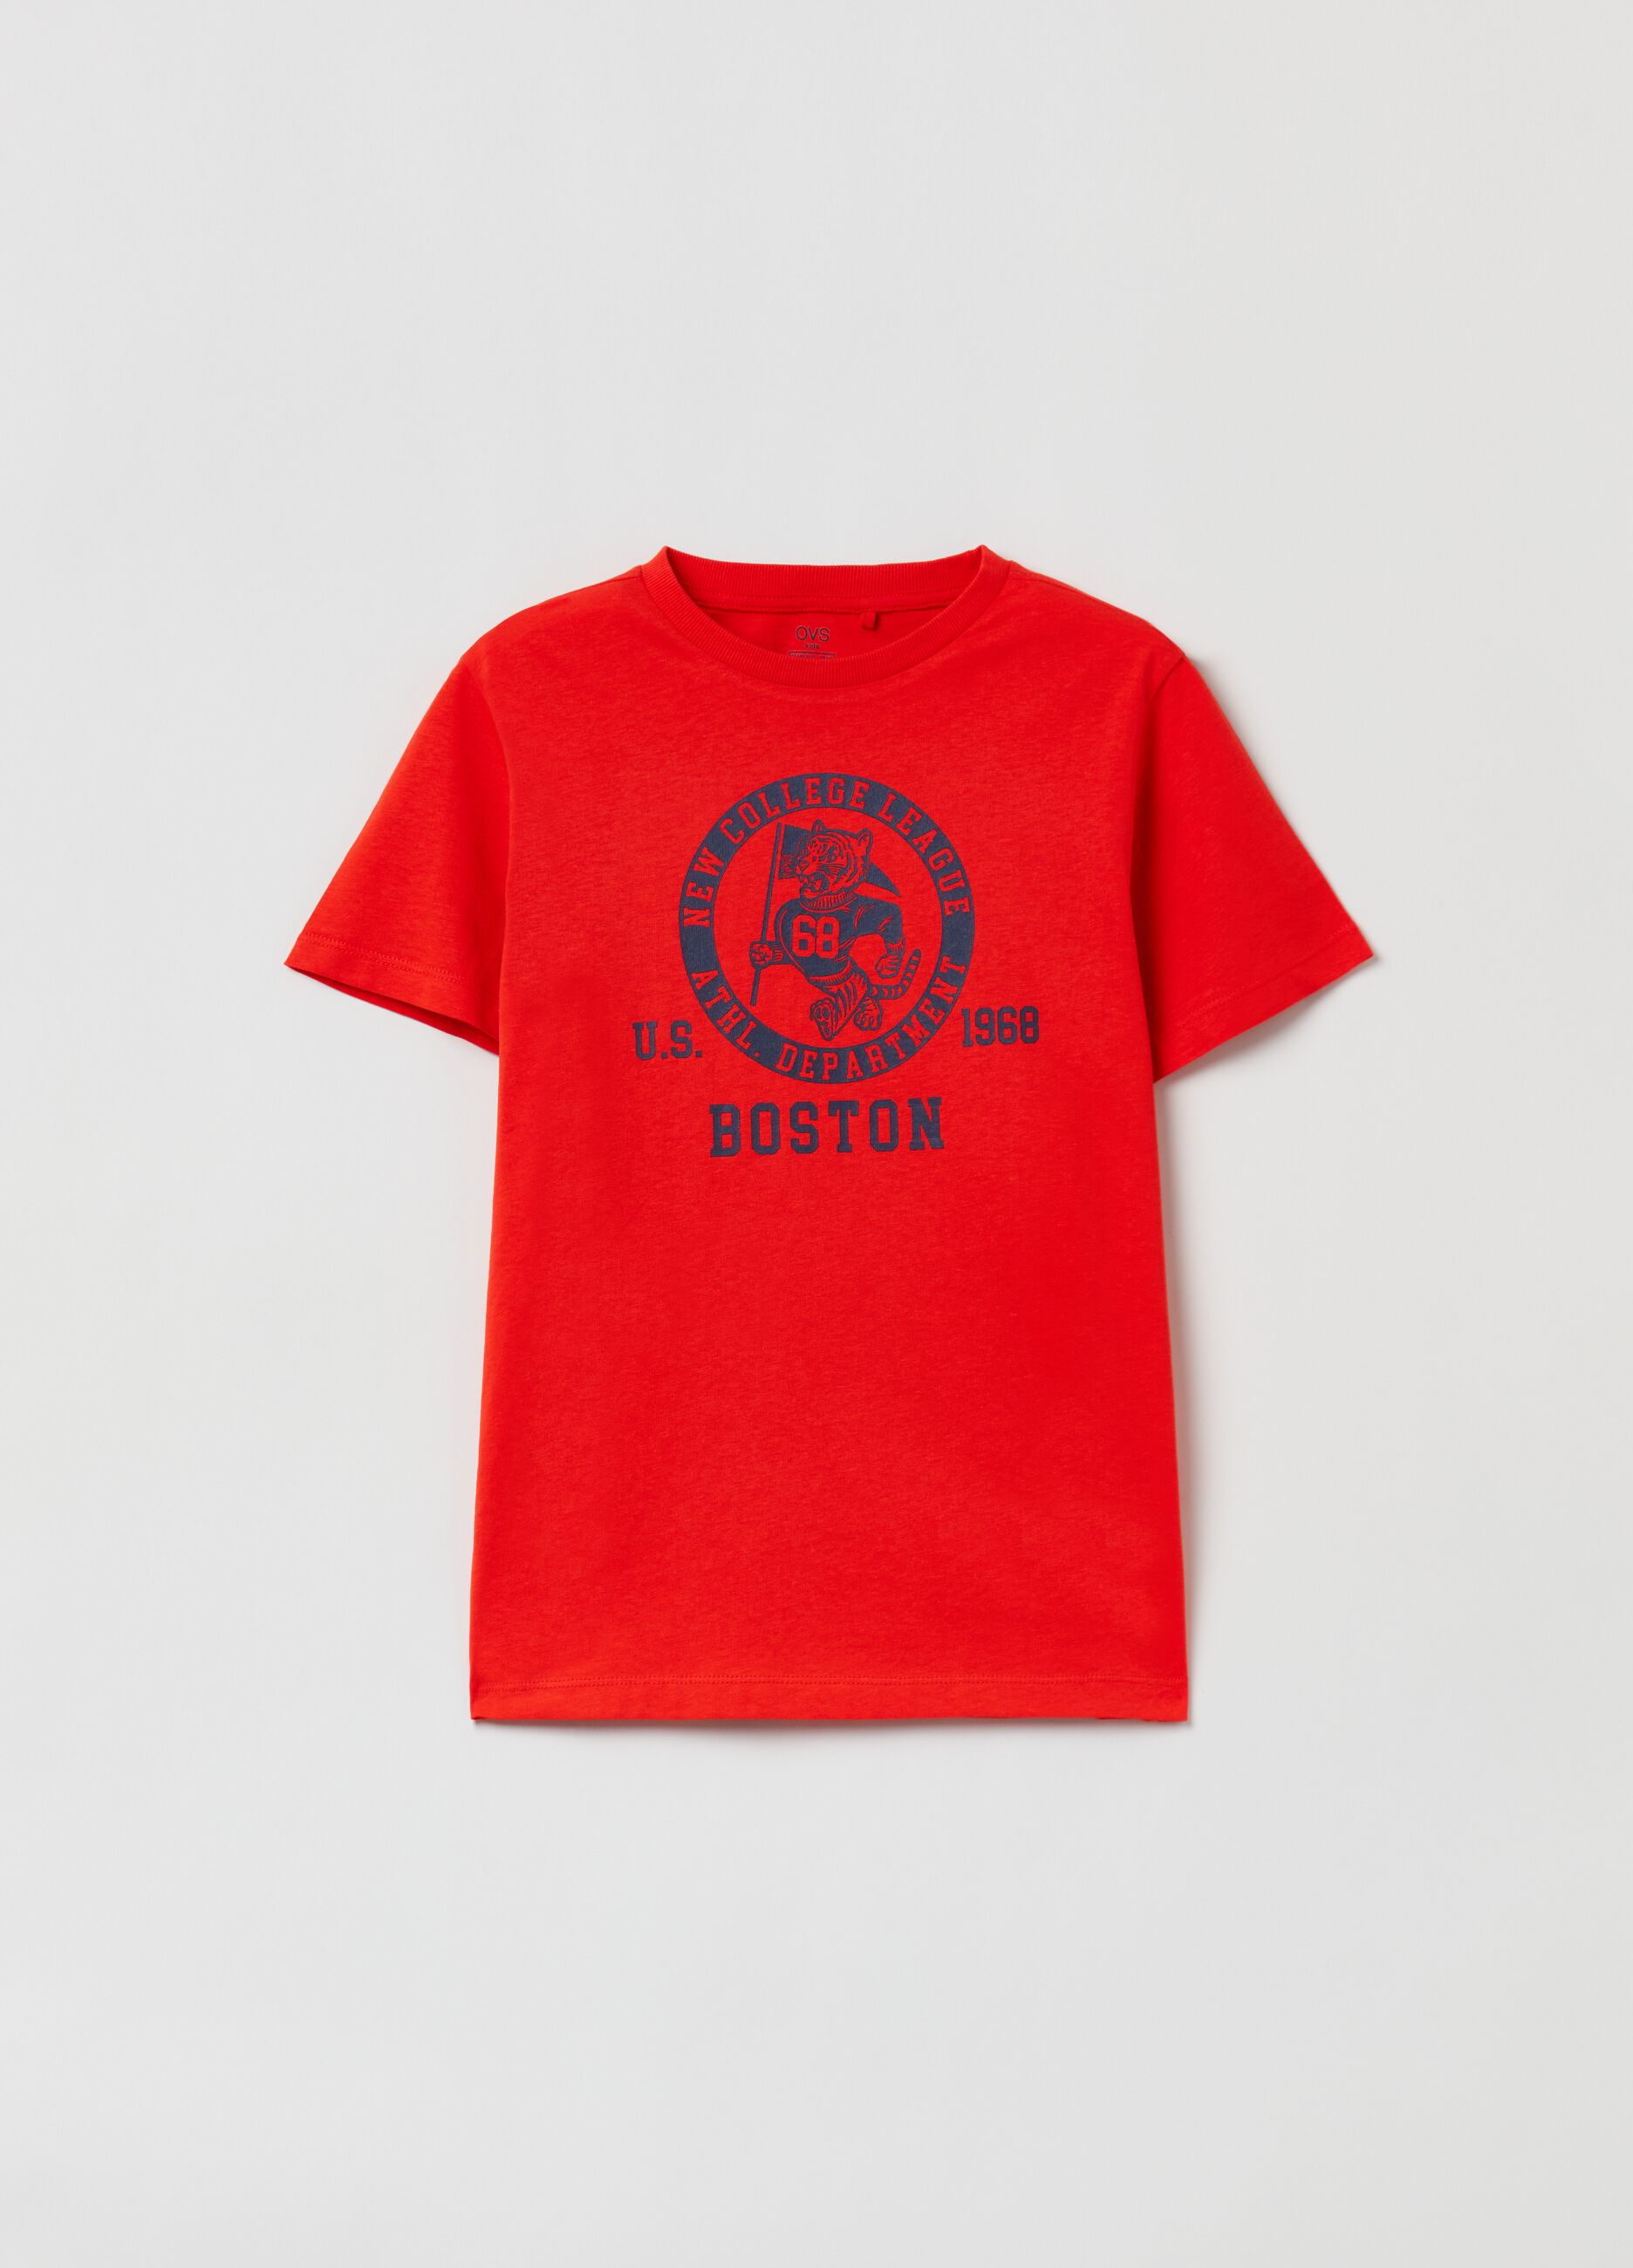 Cotton T-shirt with college Athletics print